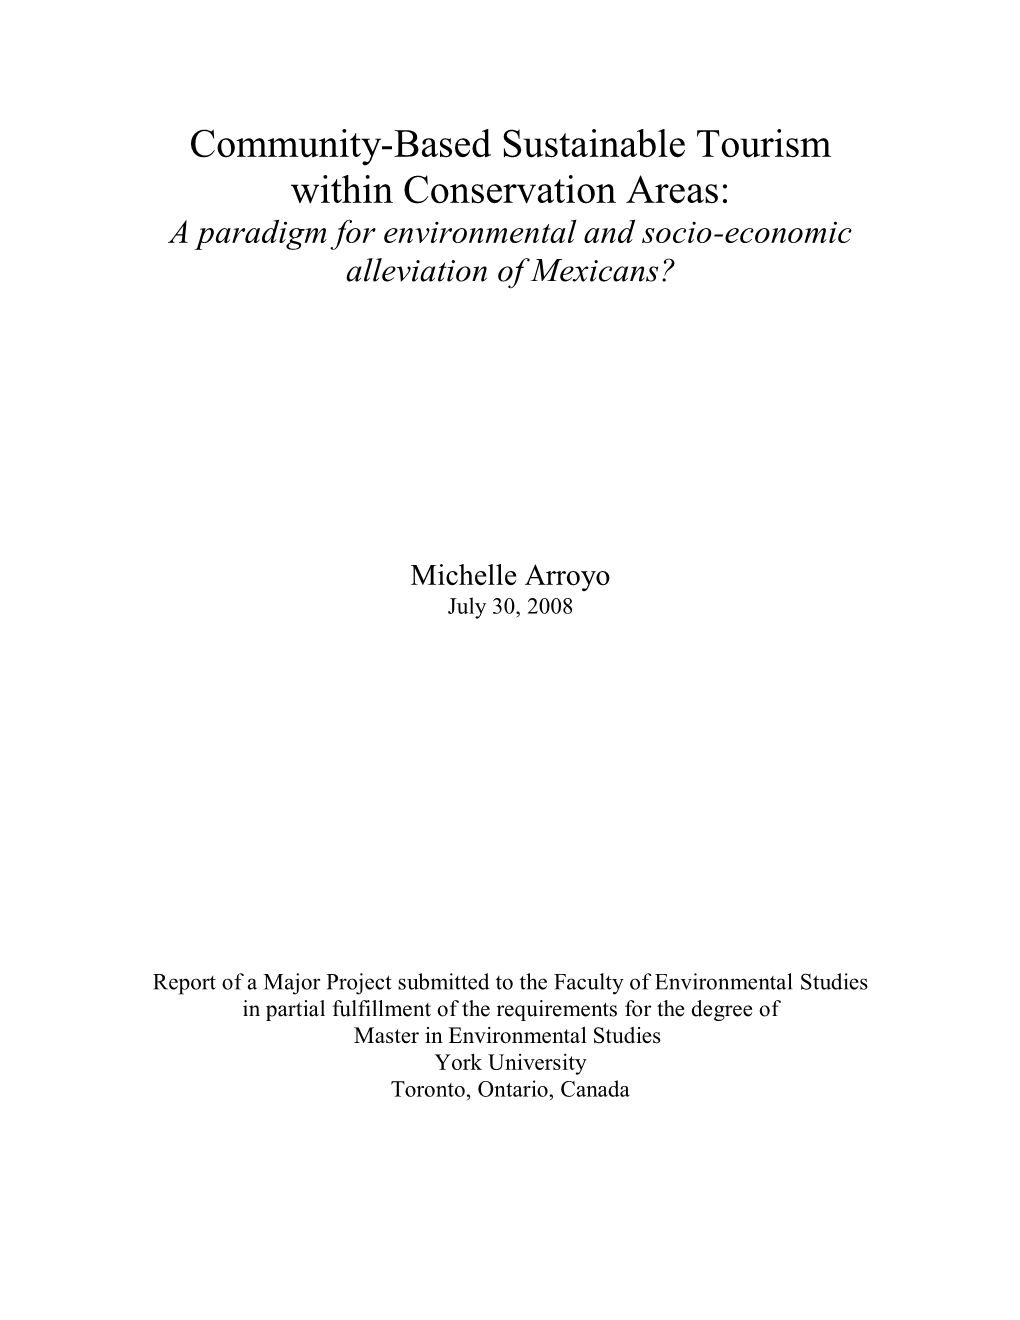 Community-Based Sustainable Tourism Within Conservation Areas: a Paradigm for Environmental and Socio-Economic Alleviation of Mexicans?